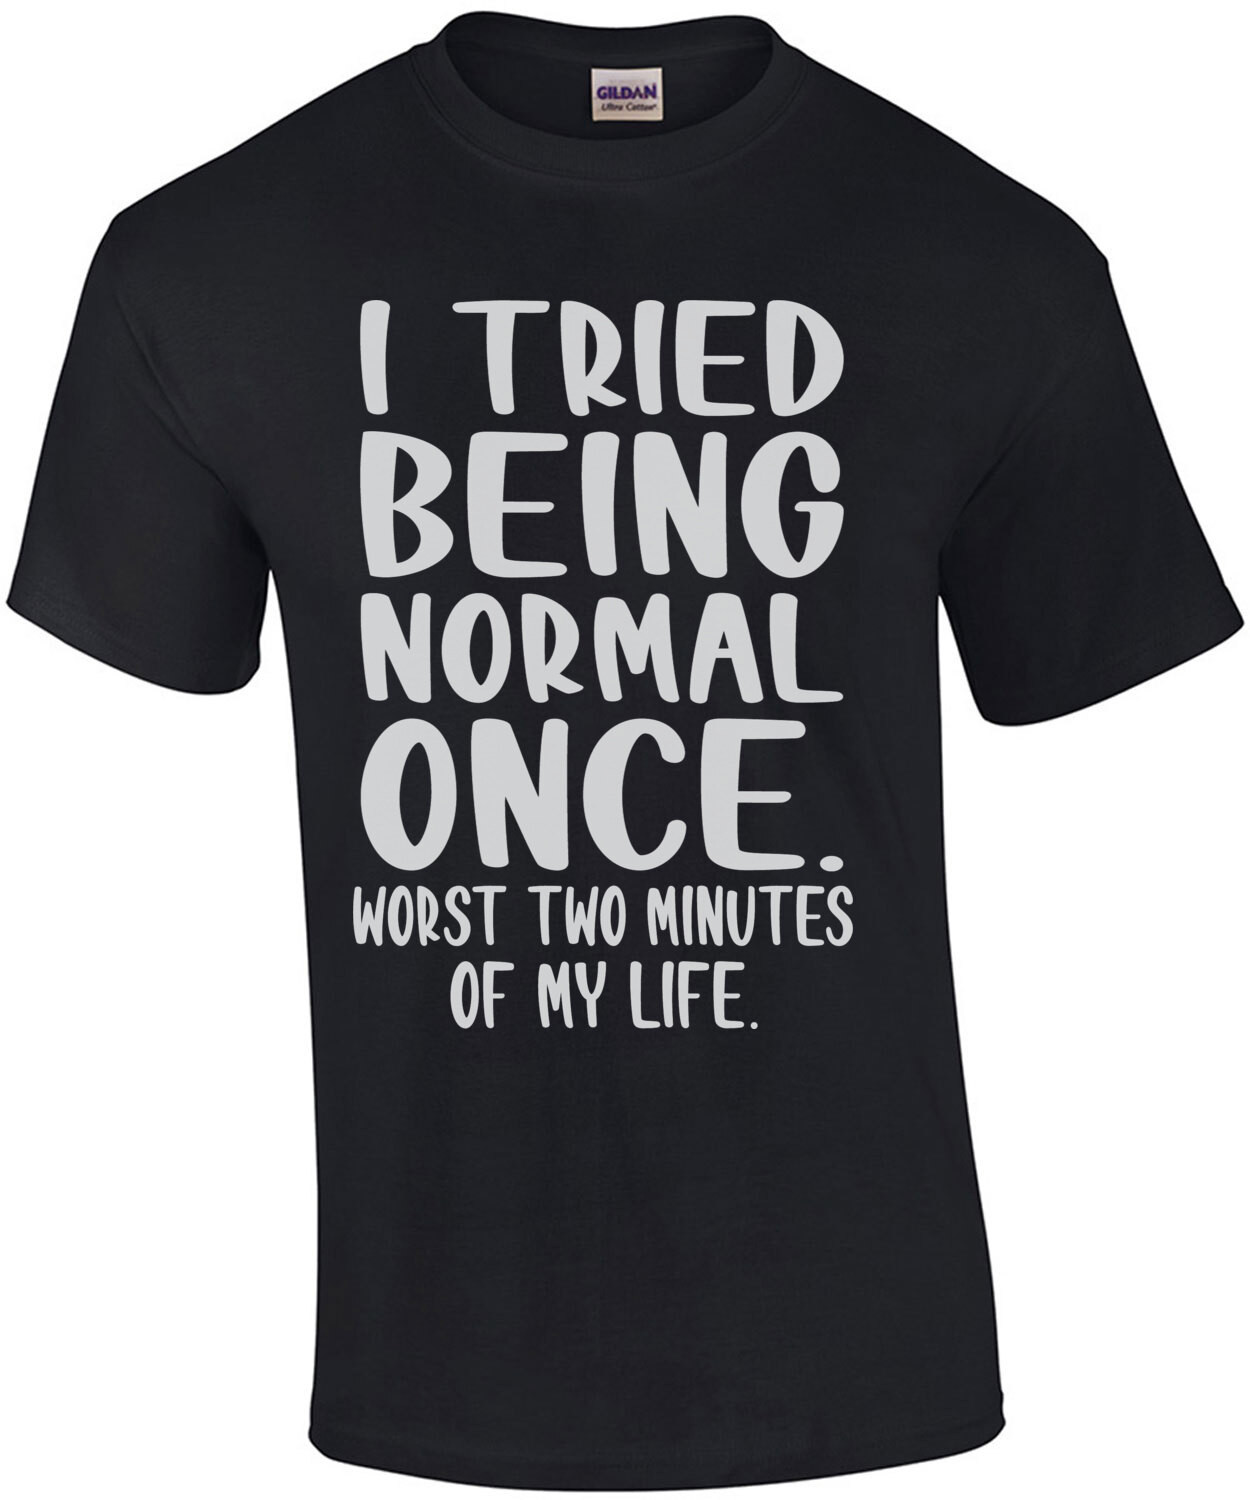 I tried being normal once. Worst 2 minutes of my life. Funny T-Shirt